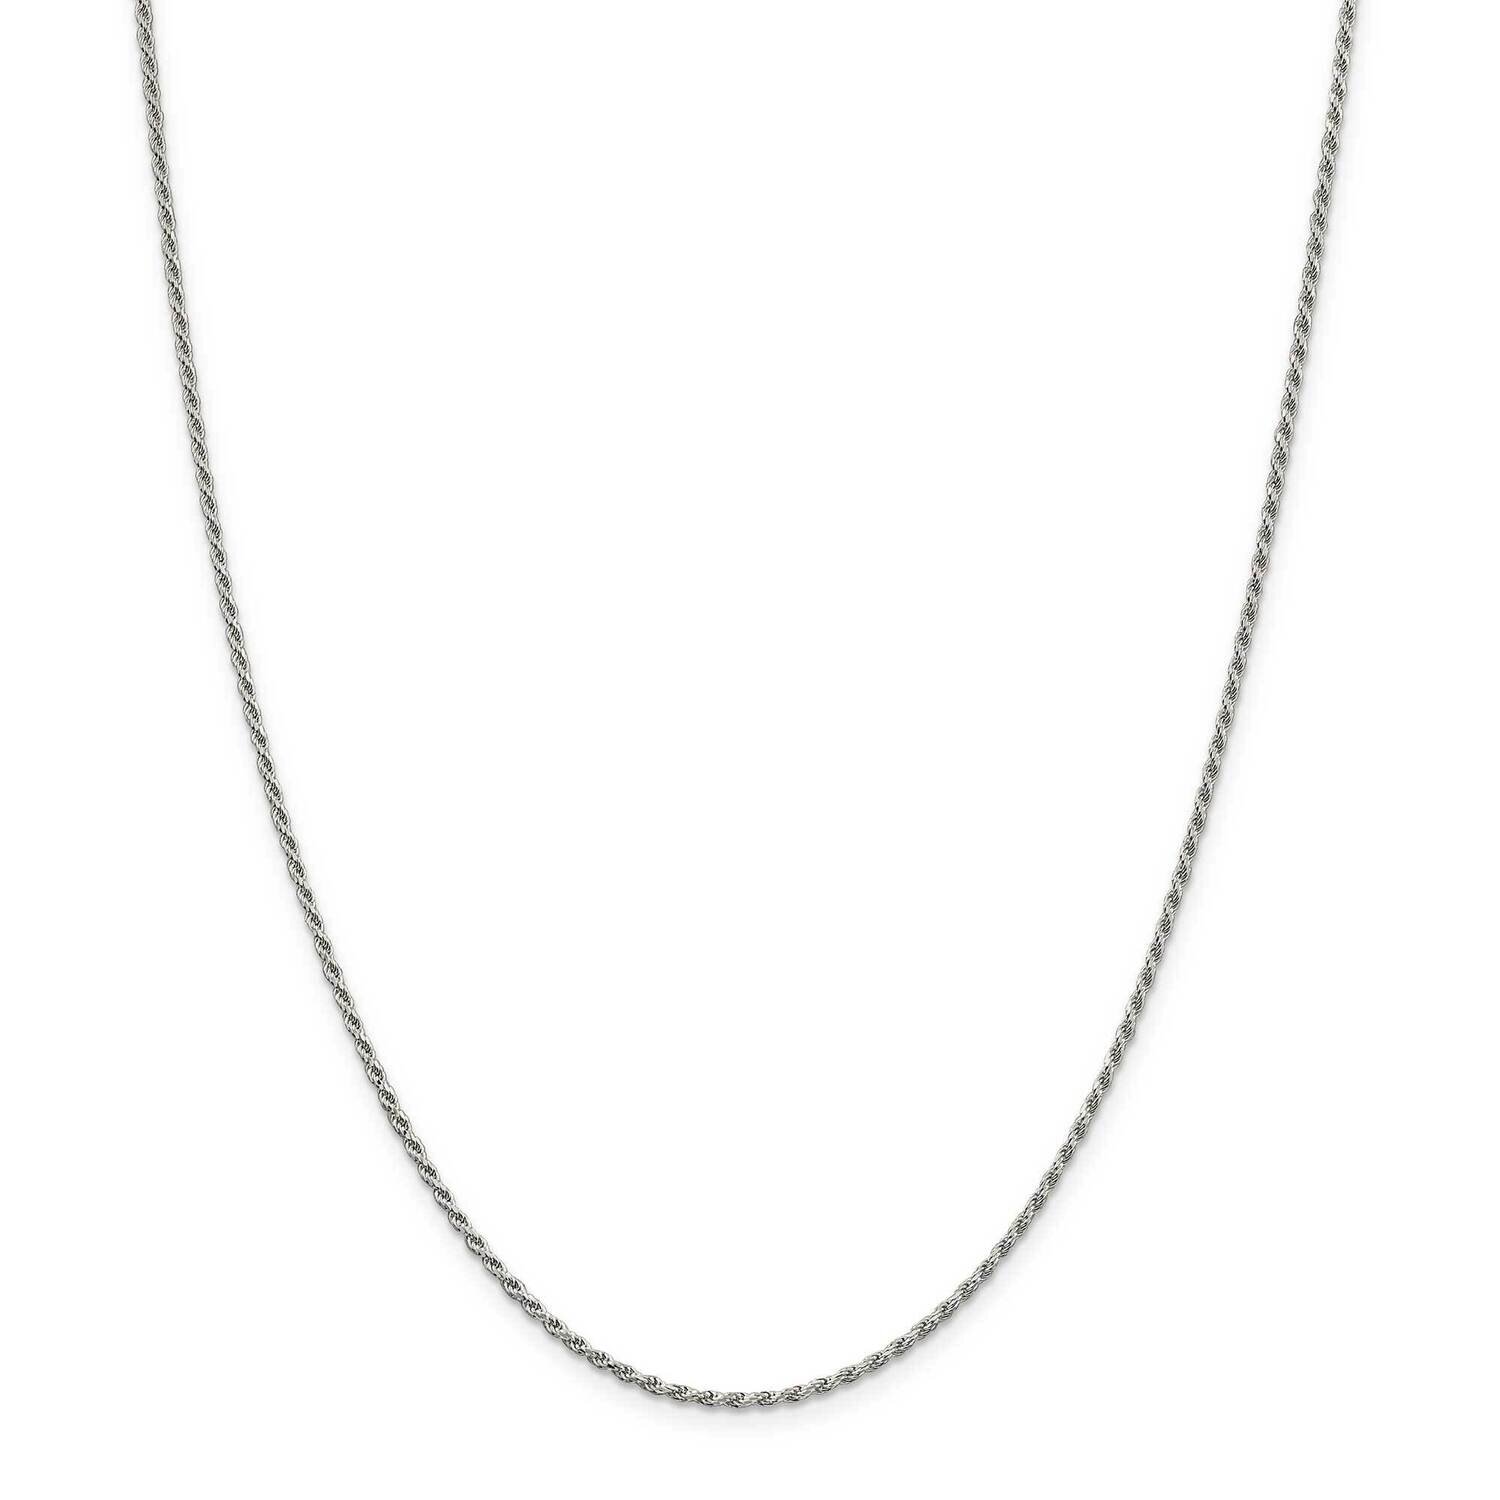 1.7mm Diamond-Cut Rope Chain with 2 Inch Extender 18 Inch Sterling Silver Rhodium-Plated QDC025RH-18